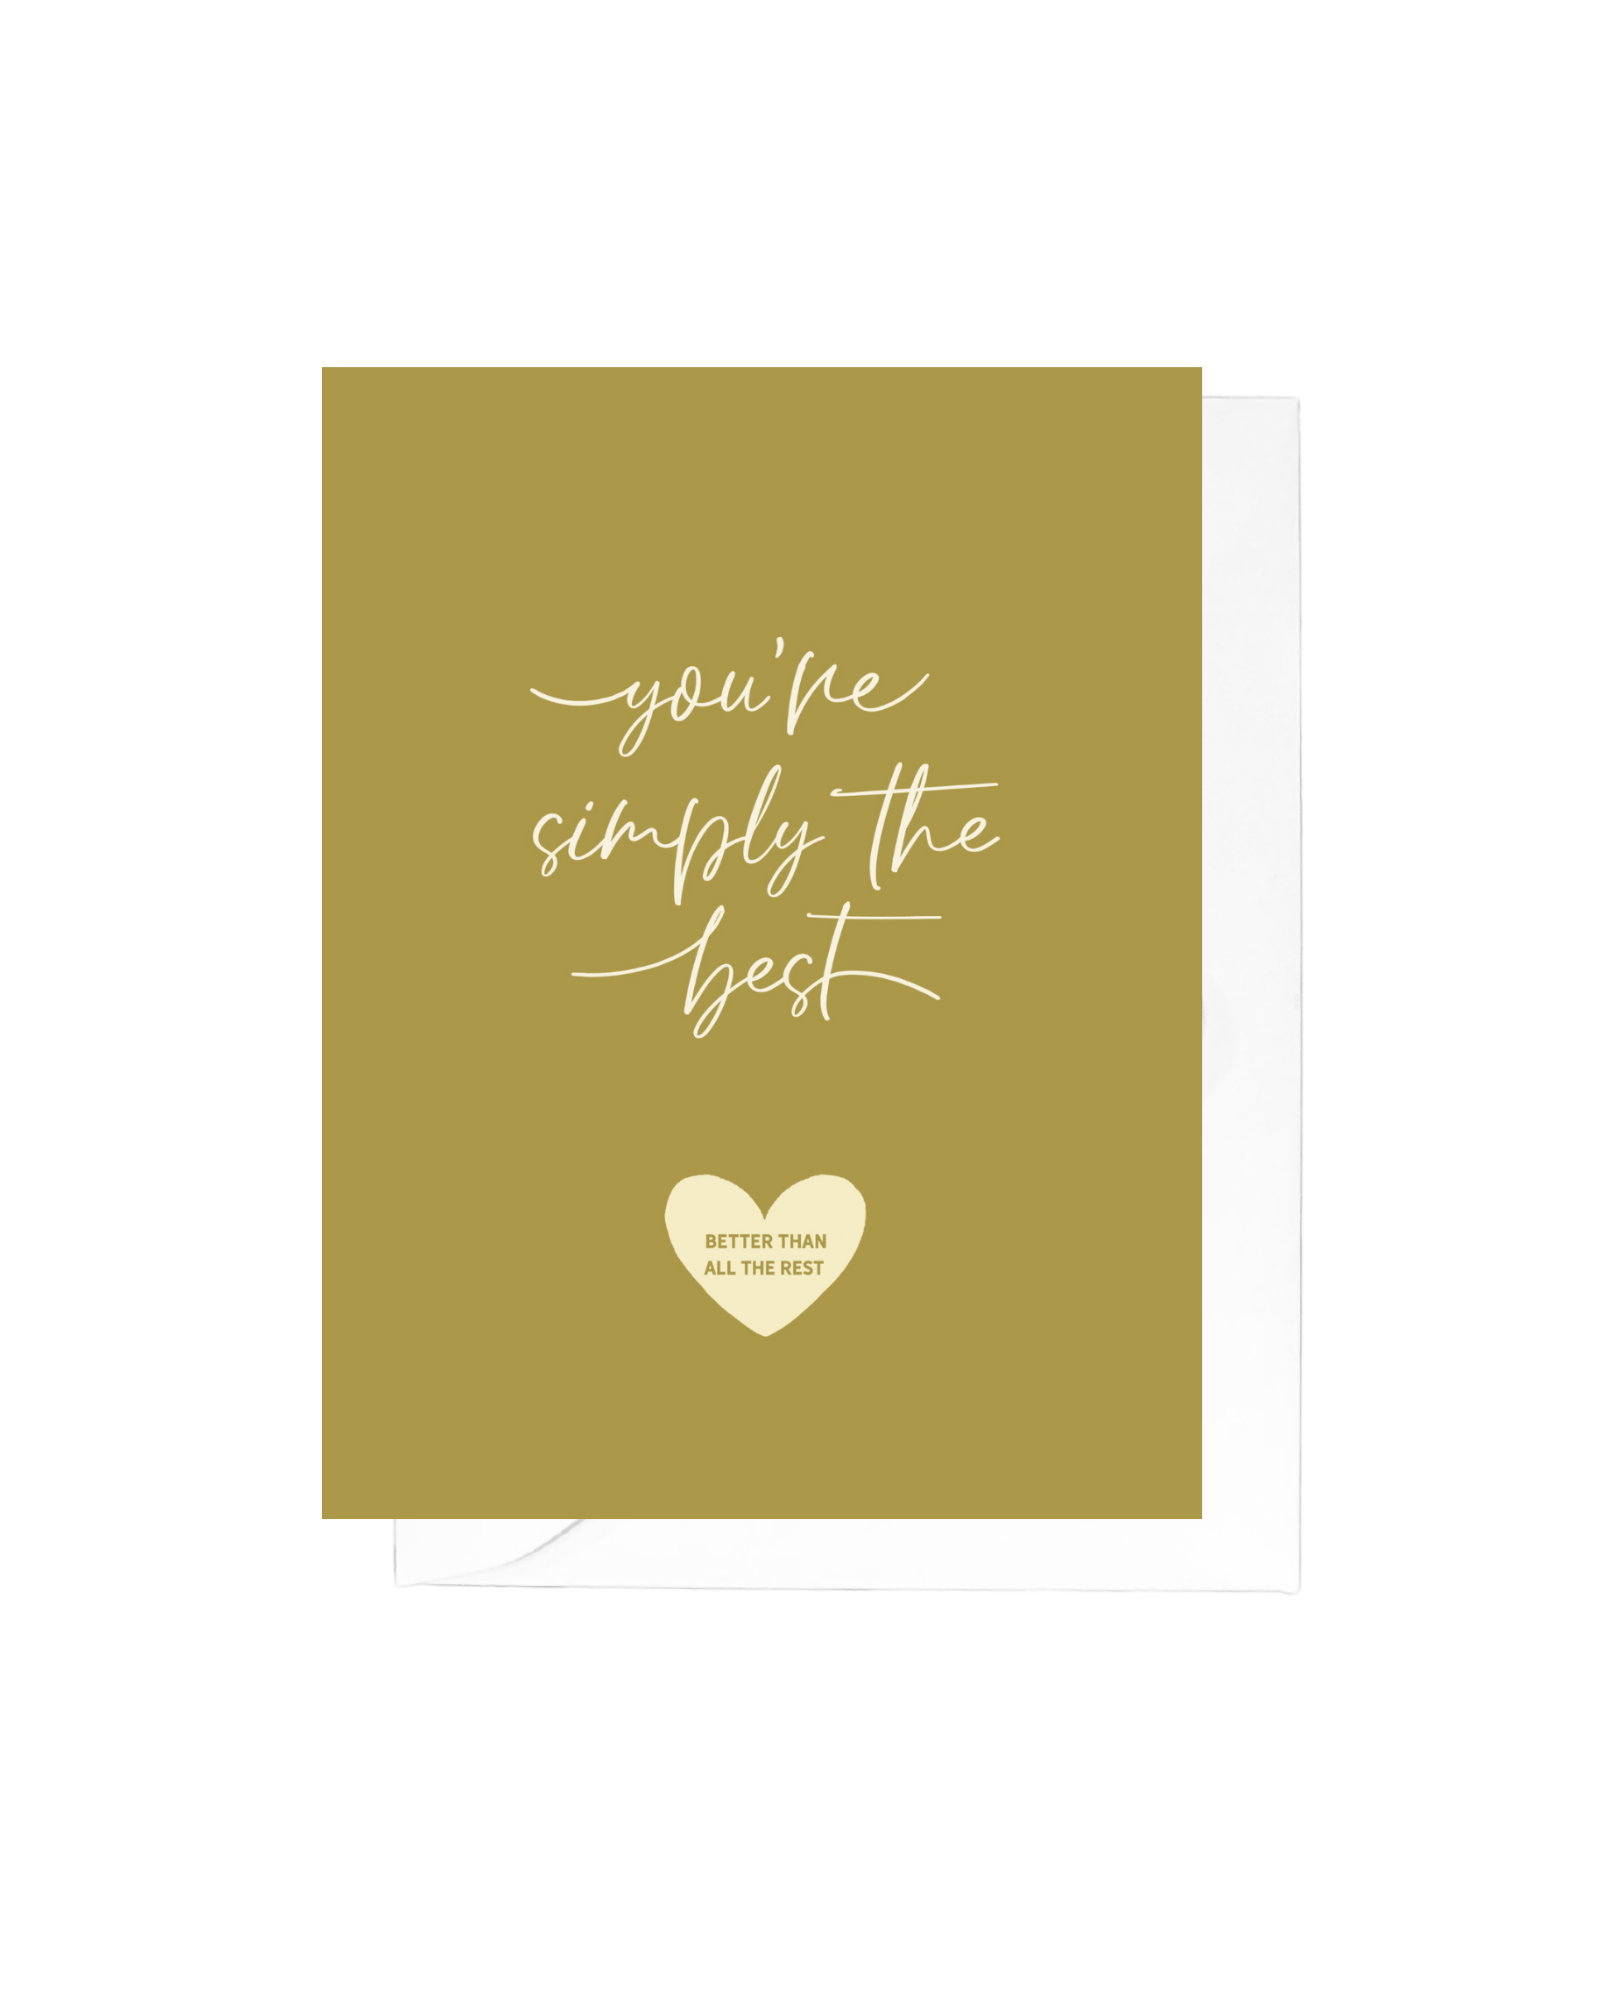 Simply The Best Greeting Card